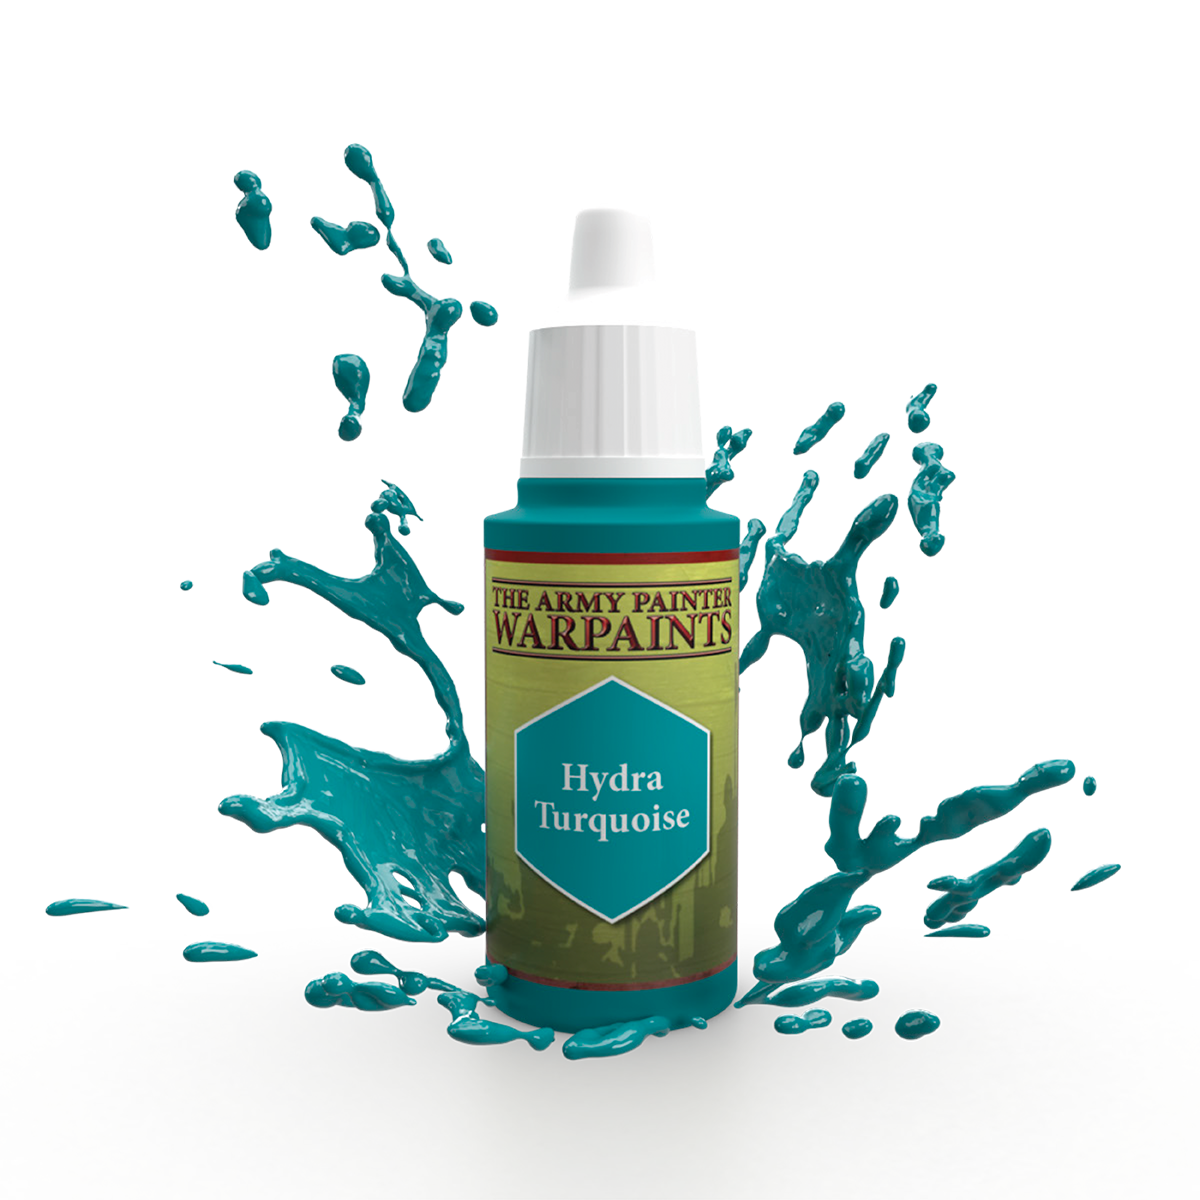 Army Painter Warpaints WP1141 Hydra Turquoise | Grognard Games